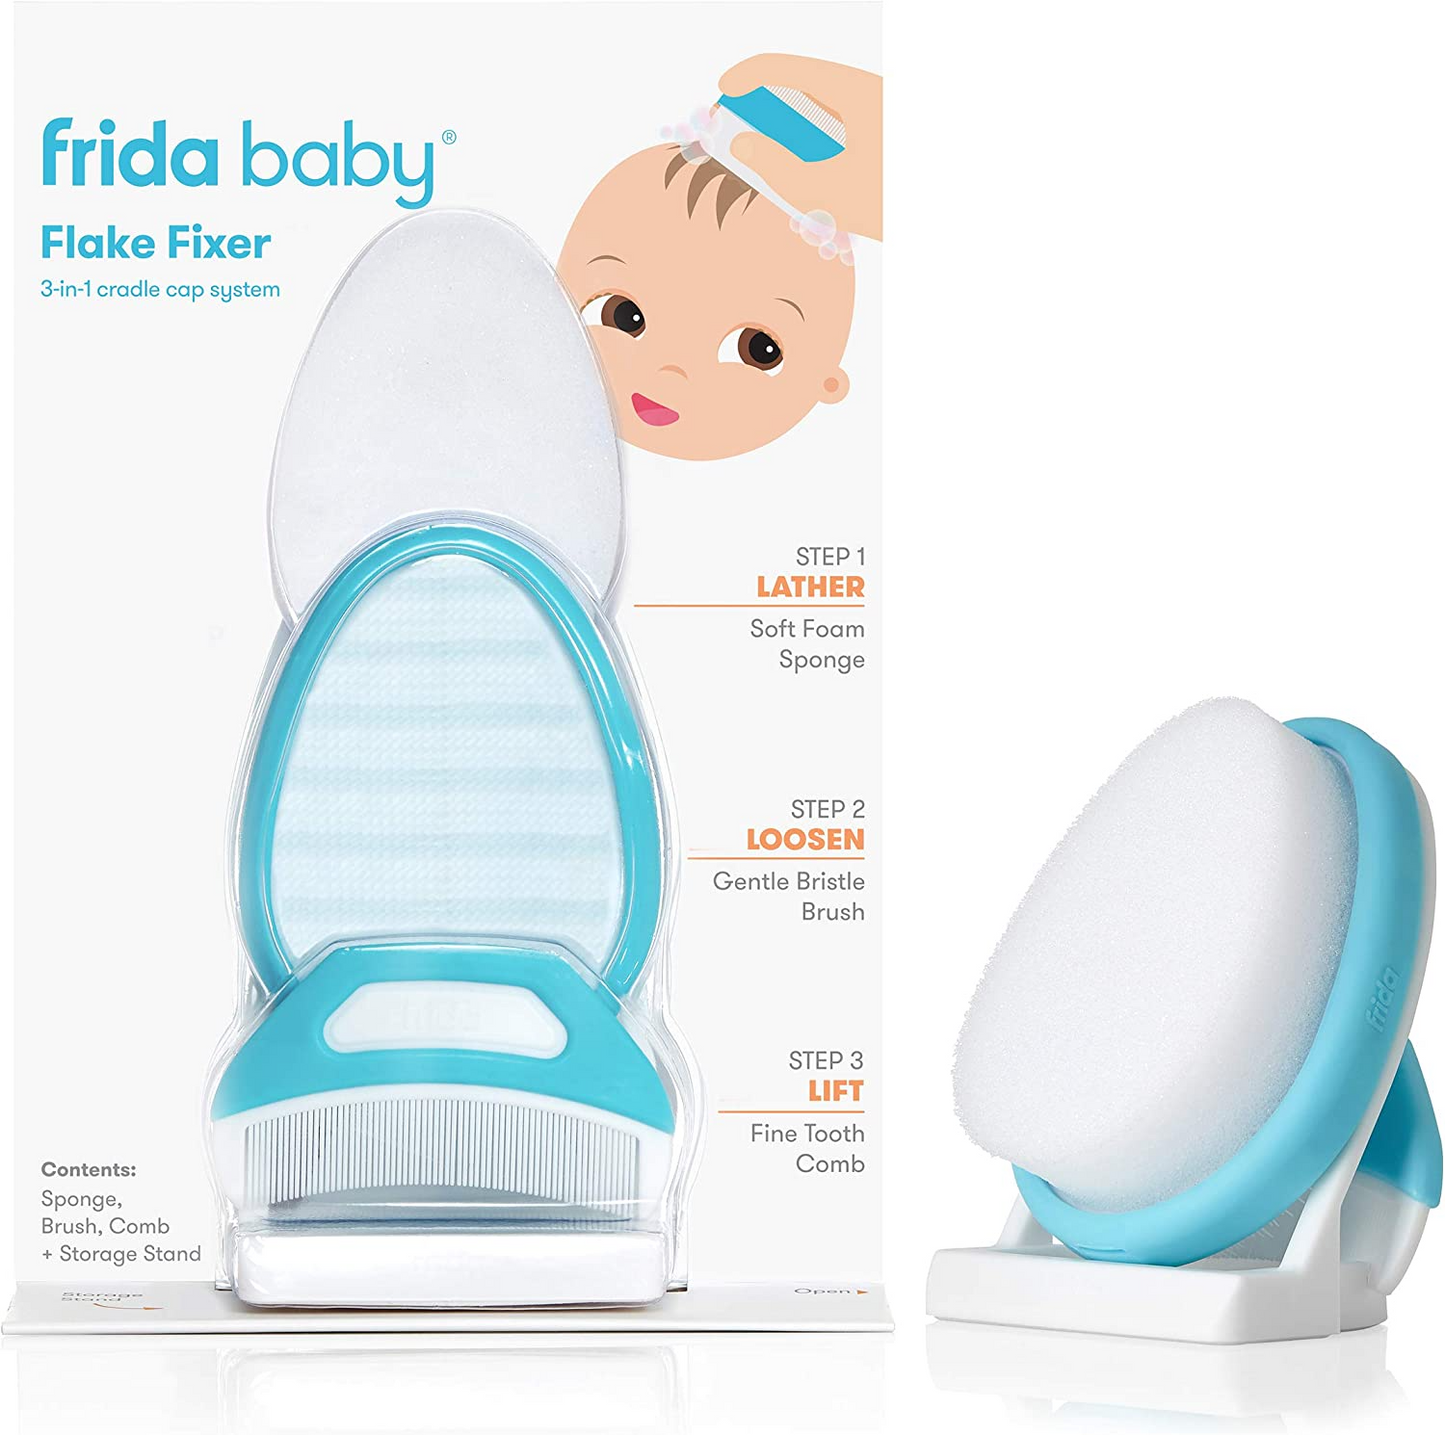 Frida Baby DermaFrida The FlakeFixer The 3-Step Cradle Cap System, White & Control The Flow Rinser by, White